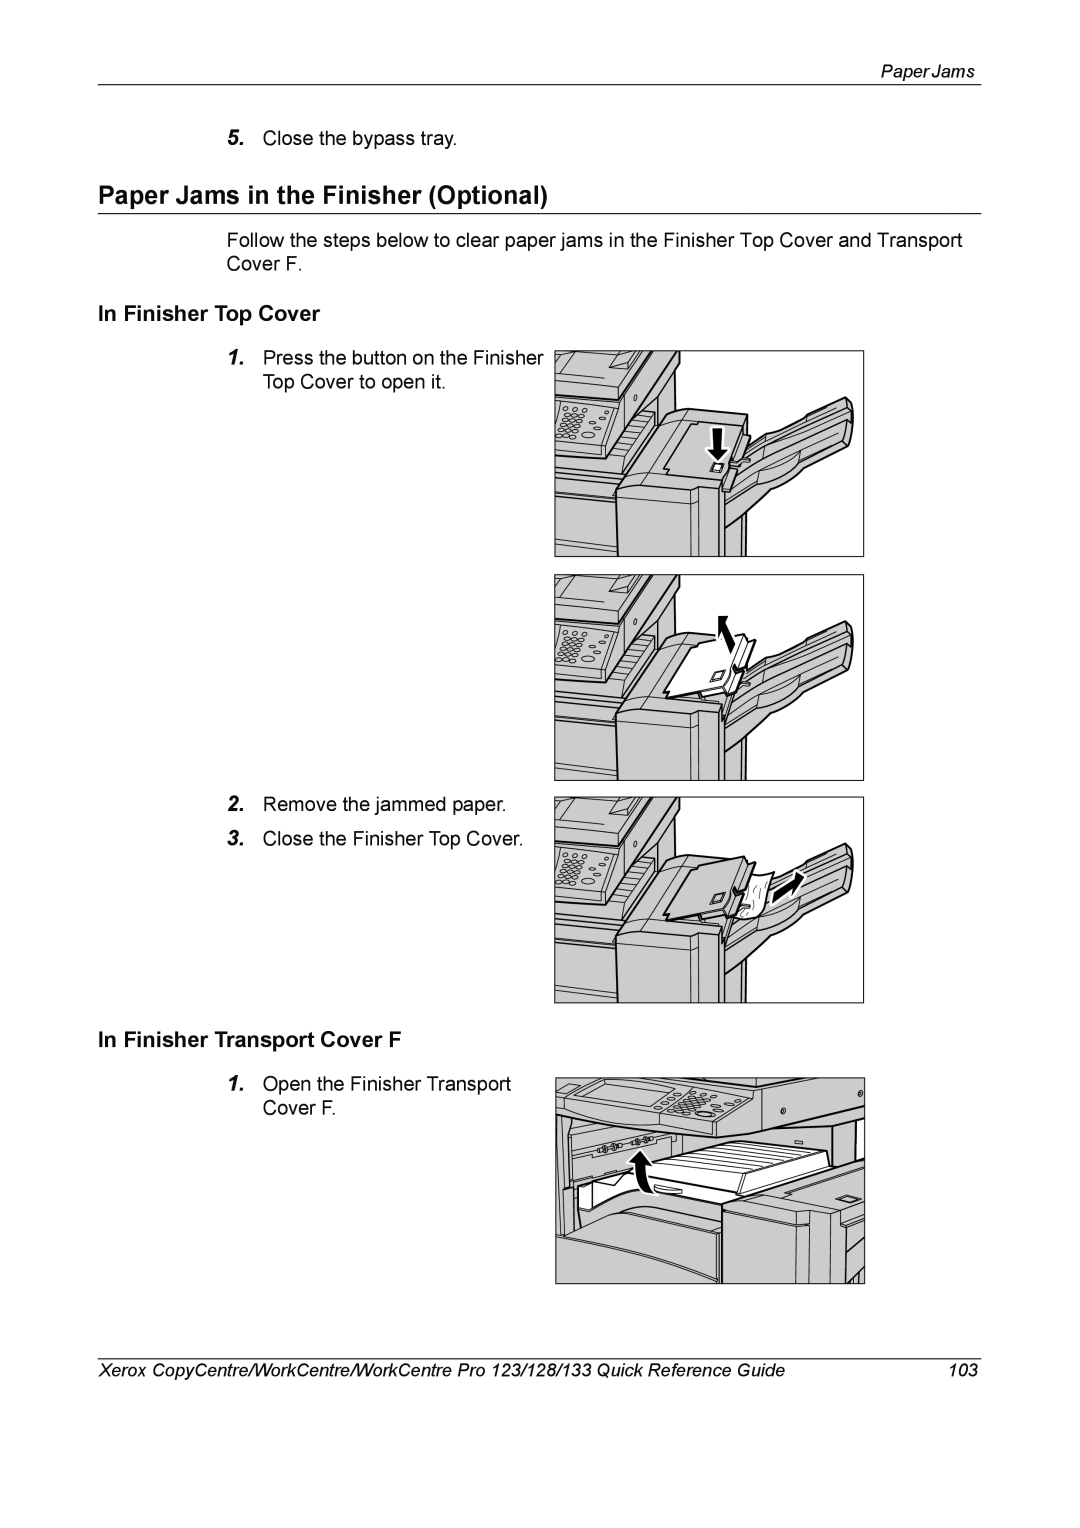 Xerox 604P18037 manual Paper Jams in the Finisher Optional, In Finisher Top Cover, In Finisher Transport Cover F 